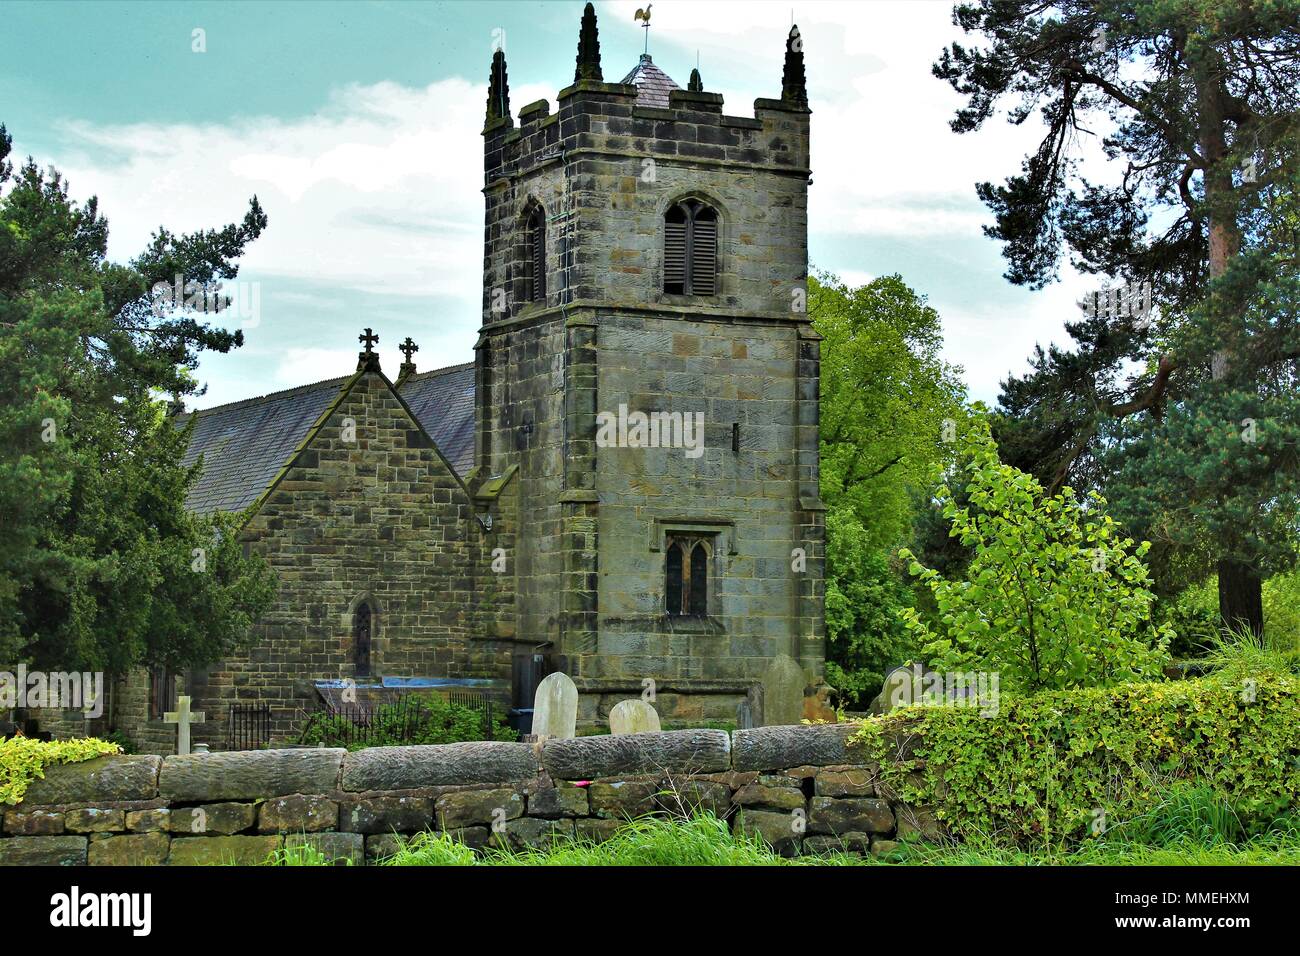 The St Michael & All Angels Church, in Stanton-By-Dale, Derbyshire, UK. Stock Photo